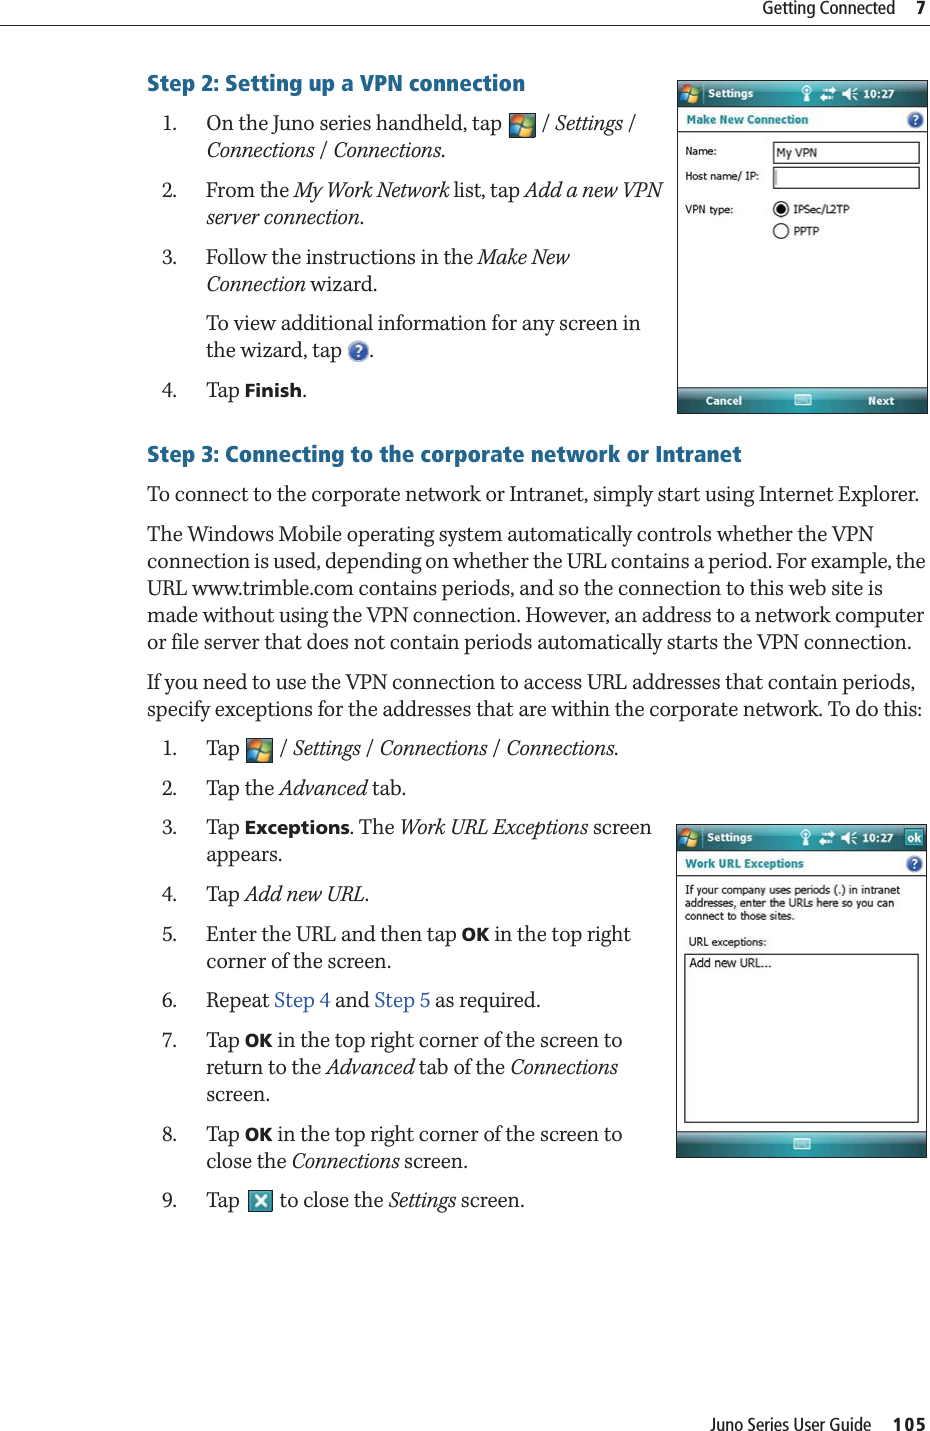 Juno Series User Guide     105Getting Connected     7Step 2: Setting up a VPN connection1. On the Juno series handheld, tap  / Settings / Connections / Connections. 2. From the My Work Network list, tap Add a new VPN server connection.3. Follow the instructions in the Make New Connection wizard.To view additional information for any screen in the wizard, tap  .4. Tap Finish.Step 3: Connecting to the corporate network or IntranetTo connect to the corporate network or Intranet, simply start using Internet Explorer.The Windows Mobile operating system automatically controls whether the VPN connection is used, depending on whether the URL contains a period. For example, the URL www.trimble.com contains periods, and so the connection to this web site is made without using the VPN connection. However, an address to a network computer or file server that does not contain periods automatically starts the VPN connection.If you need to use the VPN connection to access URL addresses that contain periods, specify exceptions for the addresses that are within the corporate network. To do this:1. Tap / Settings / Connections / Connections. 2. Tap the Advanced tab.3. Tap Exceptions. The Work URL Exceptions screen appears. 4. Tap Add new URL.5. Enter the URL and then tap OK in the top right corner of the screen.6. Repeat Step 4 and Step 5 as required.7. Tap OK in the top right corner of the screen to return to the Advanced tab of the Connections screen.8. Tap OK in the top right corner of the screen to close the Connections screen.9. Tap   to close the Settings screen.